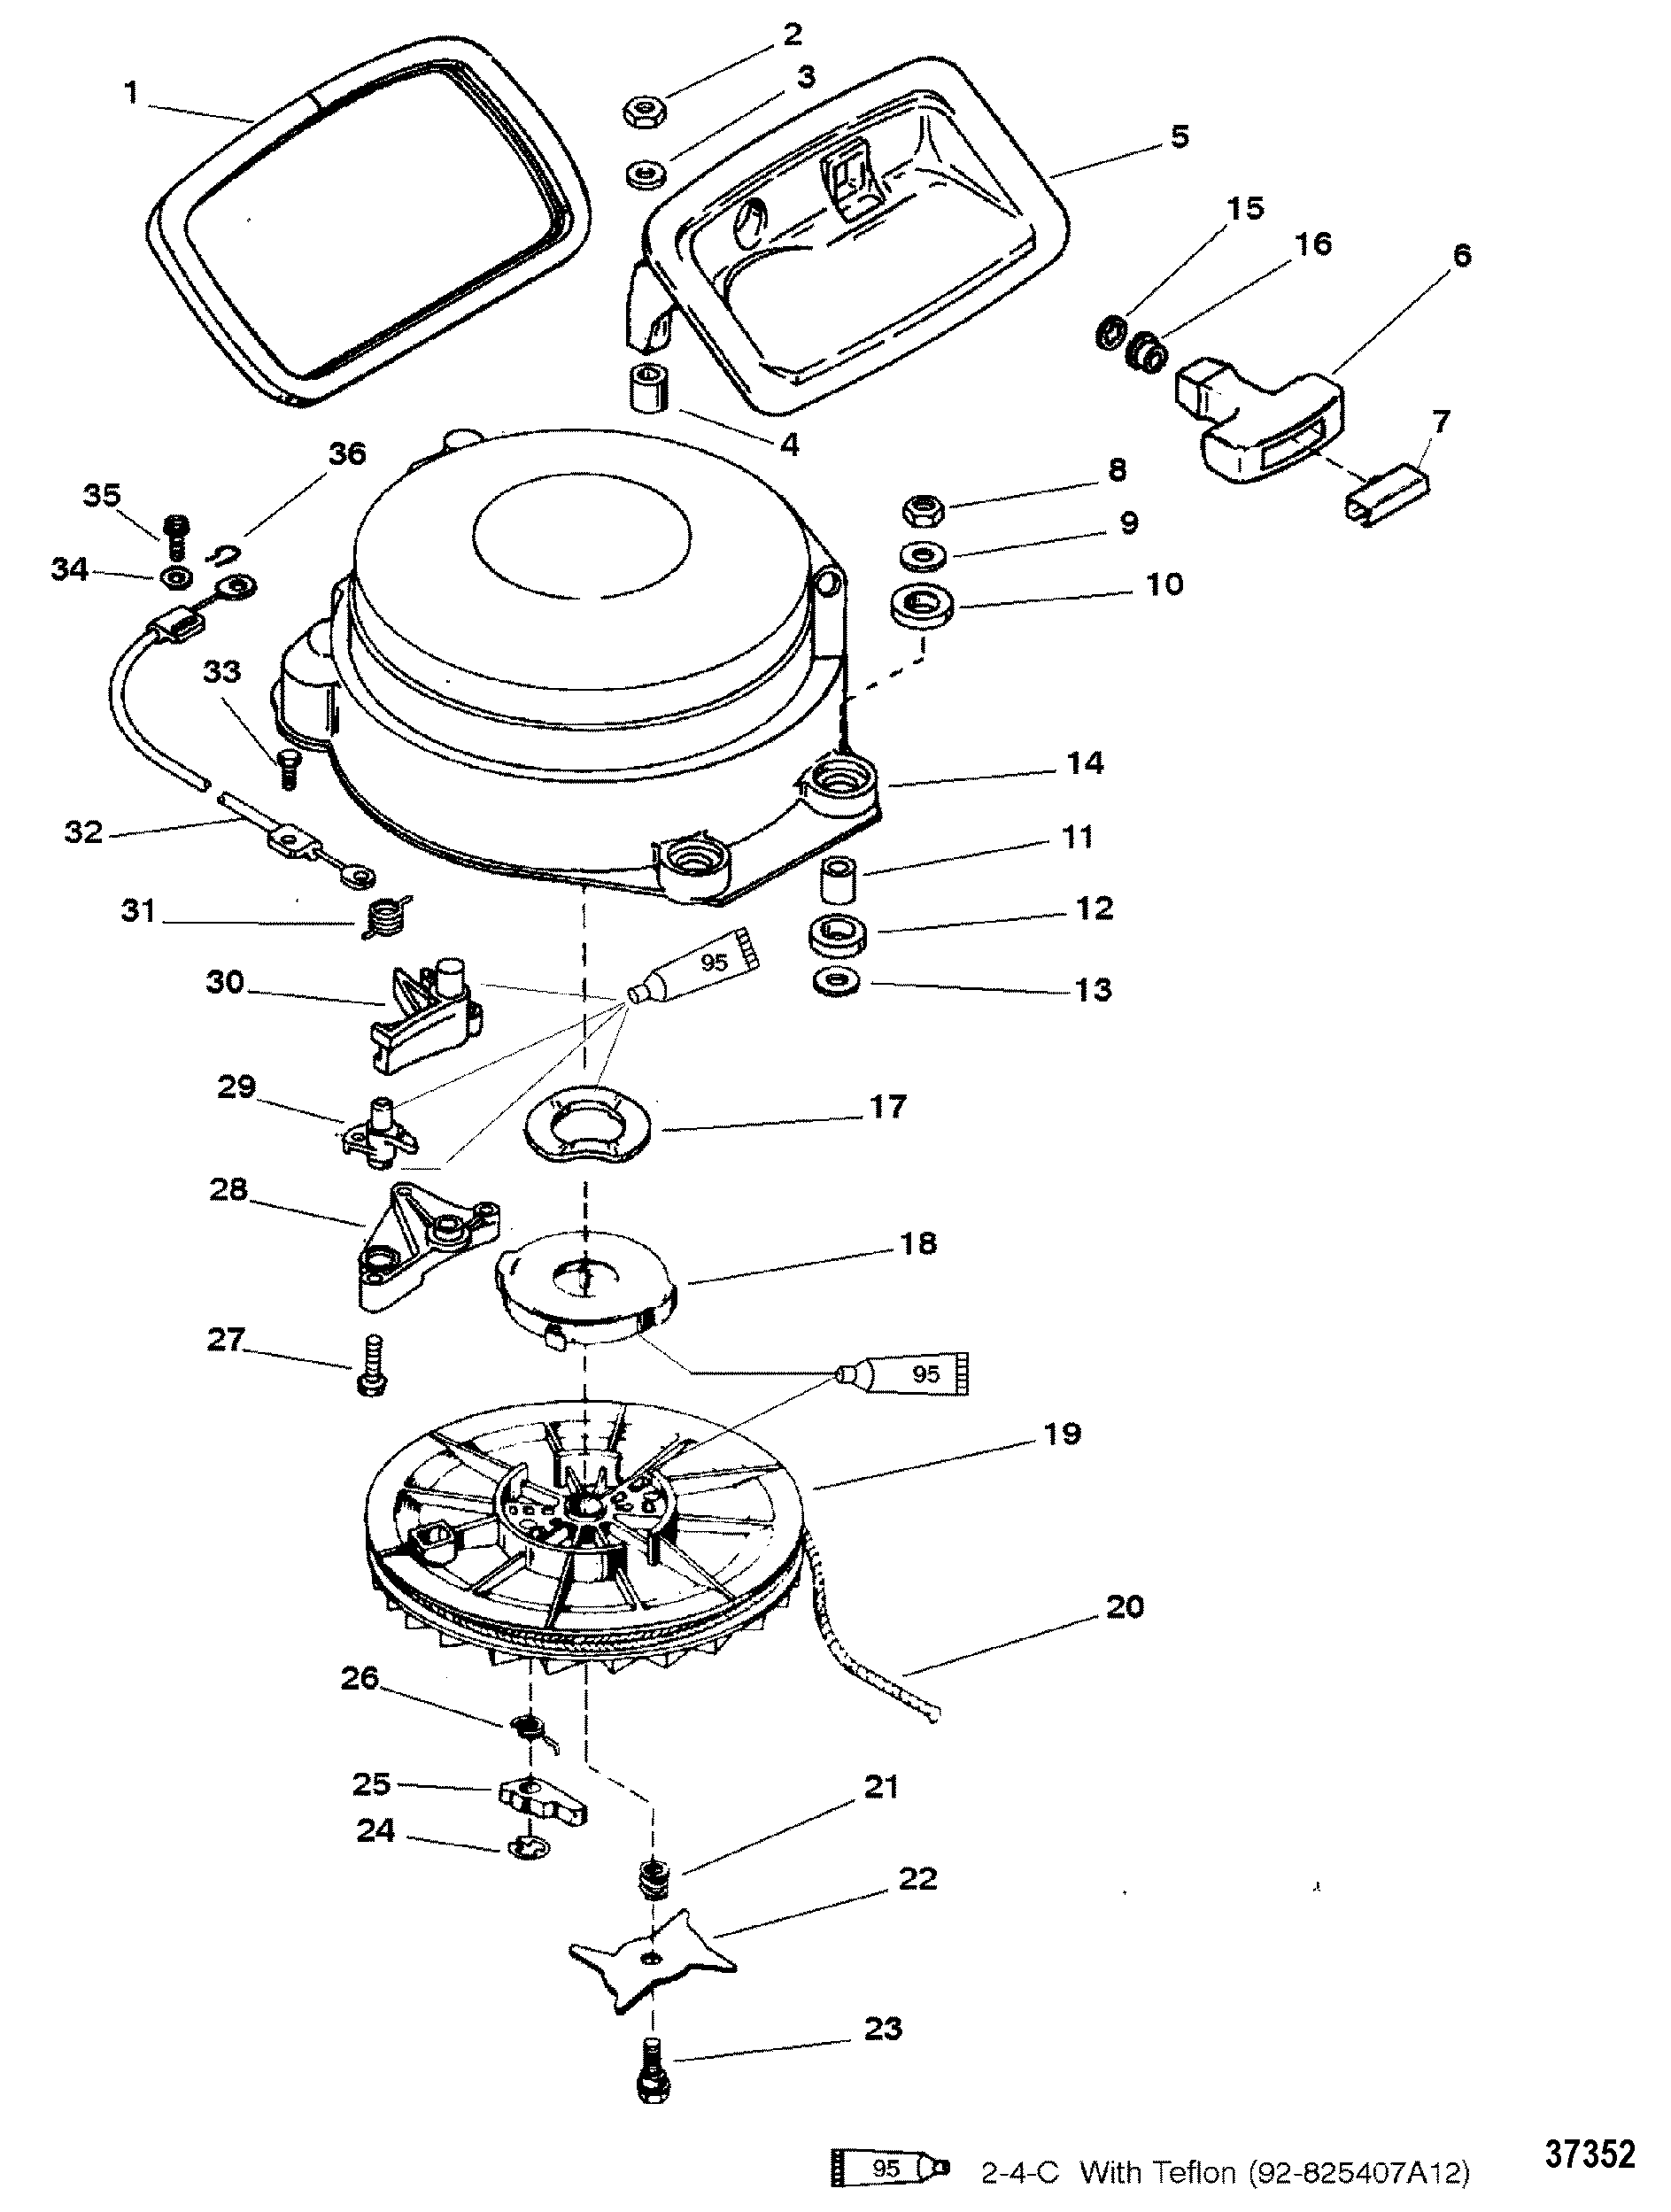 MANUAL START COMPONENTS